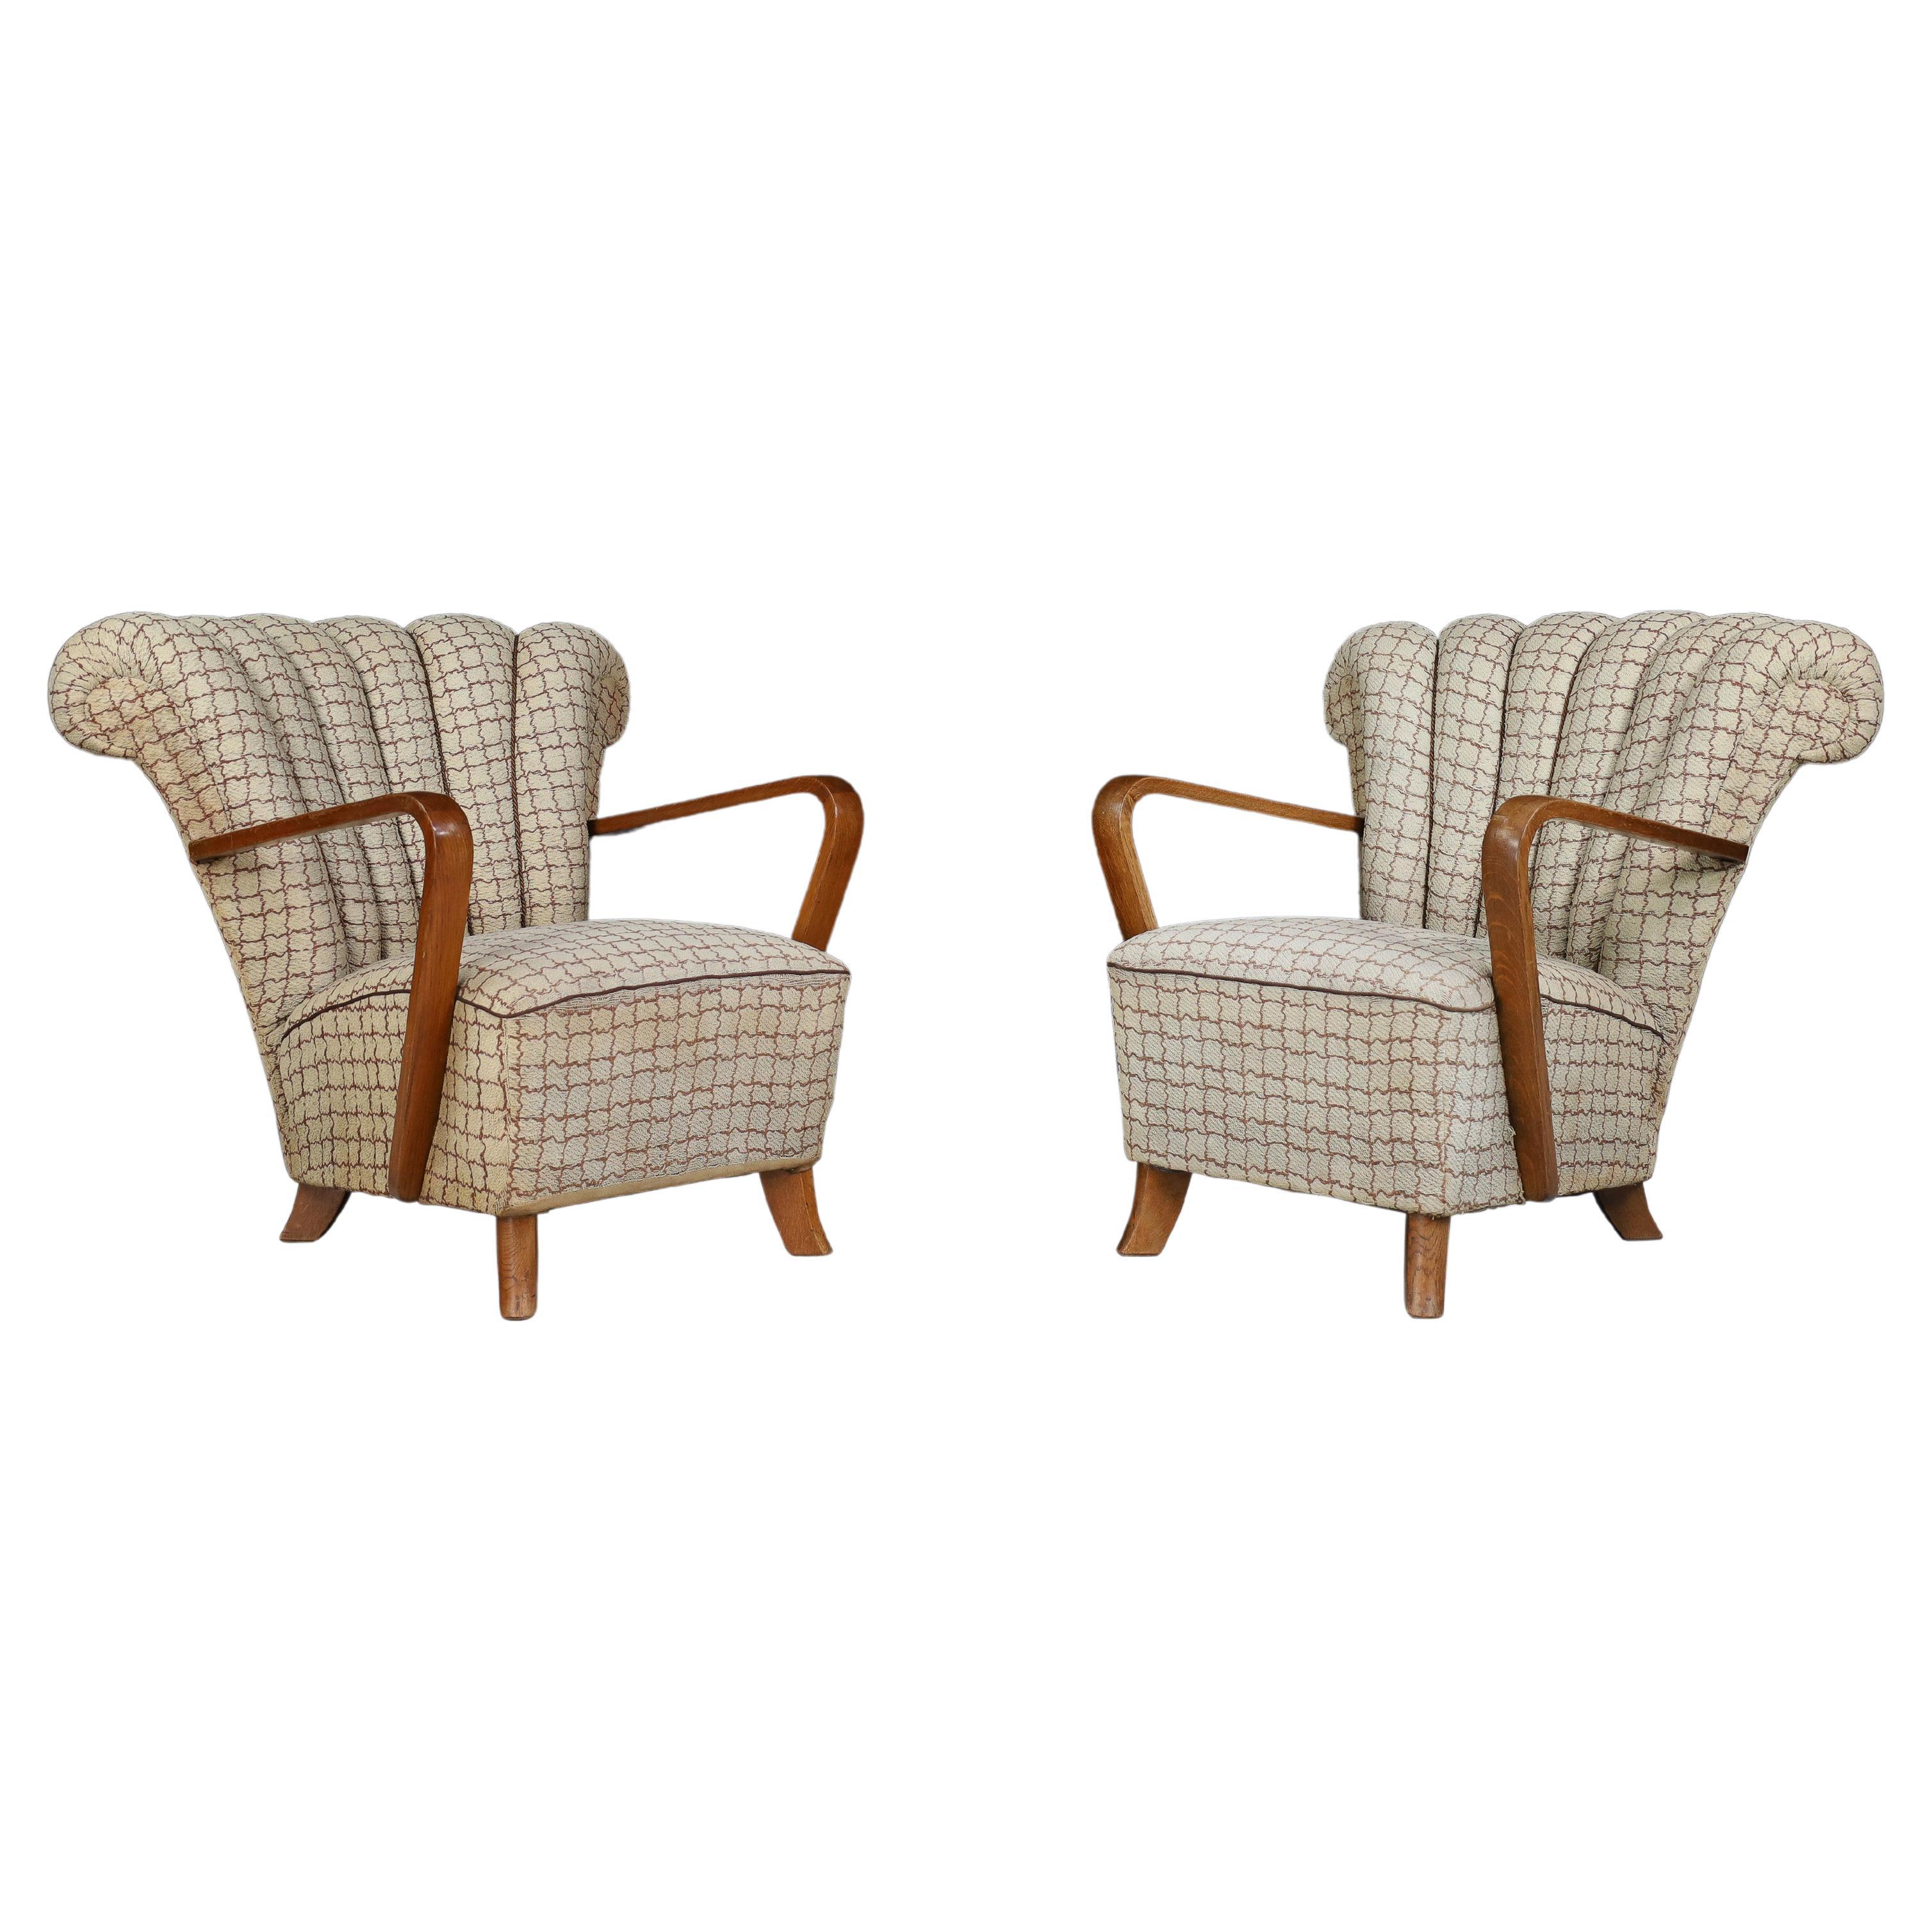 Art Deco Fan-Shaped Armchairs in Bentwood and Original Upholstery, Praque, 1930s For Sale